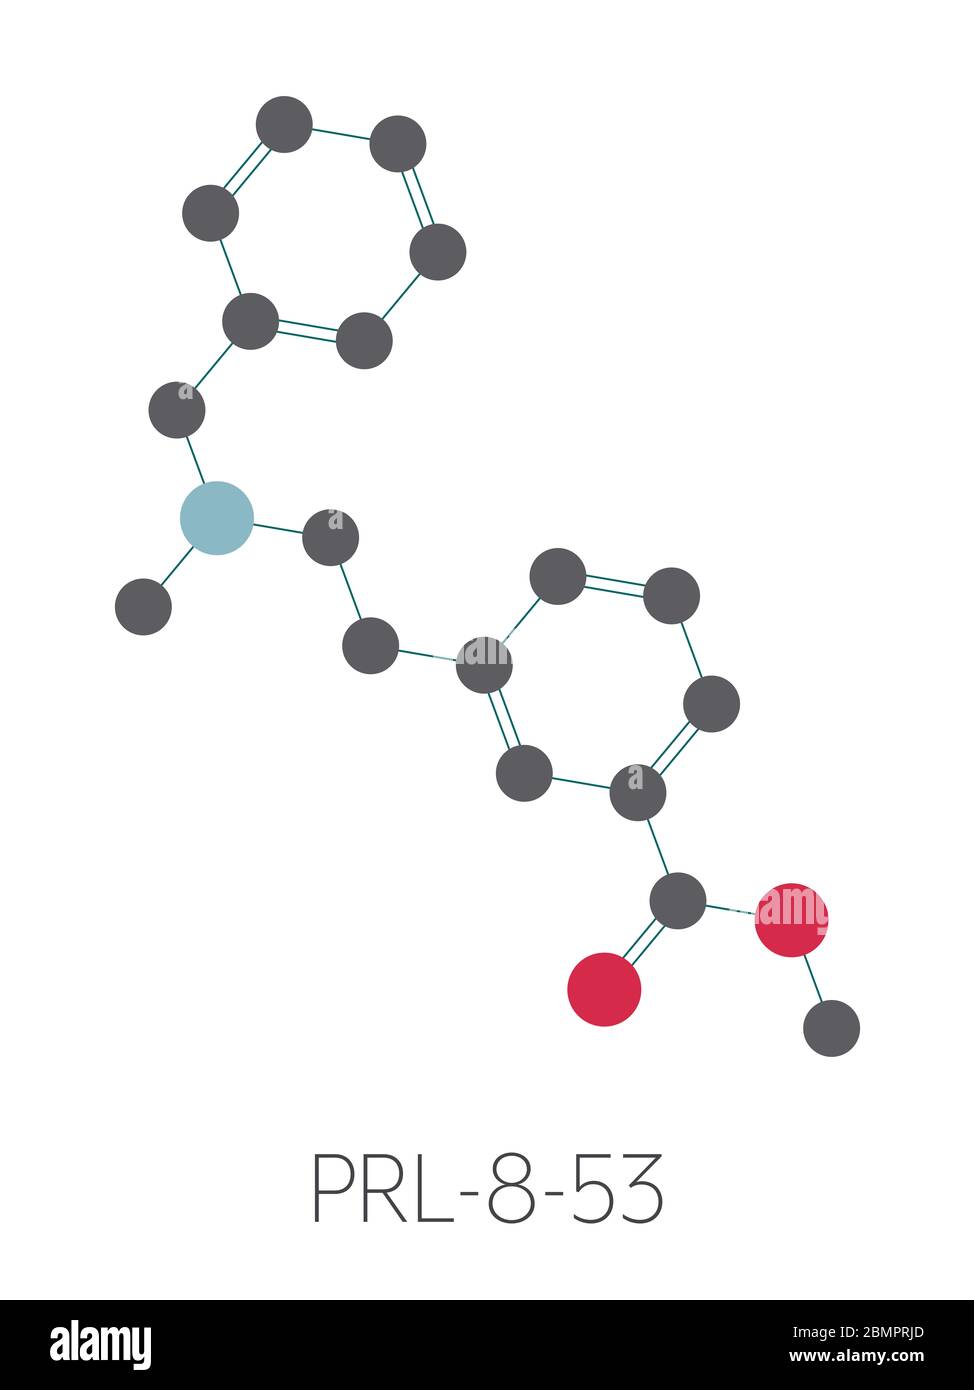 PRL-8-53 nootropic research chemical molecule. Stylized skeletal formula (chemical structure): Atoms are shown as color-coded circles: hydrogen (hidden), carbon (grey), oxygen (red), nitrogen (blue). Stock Photo